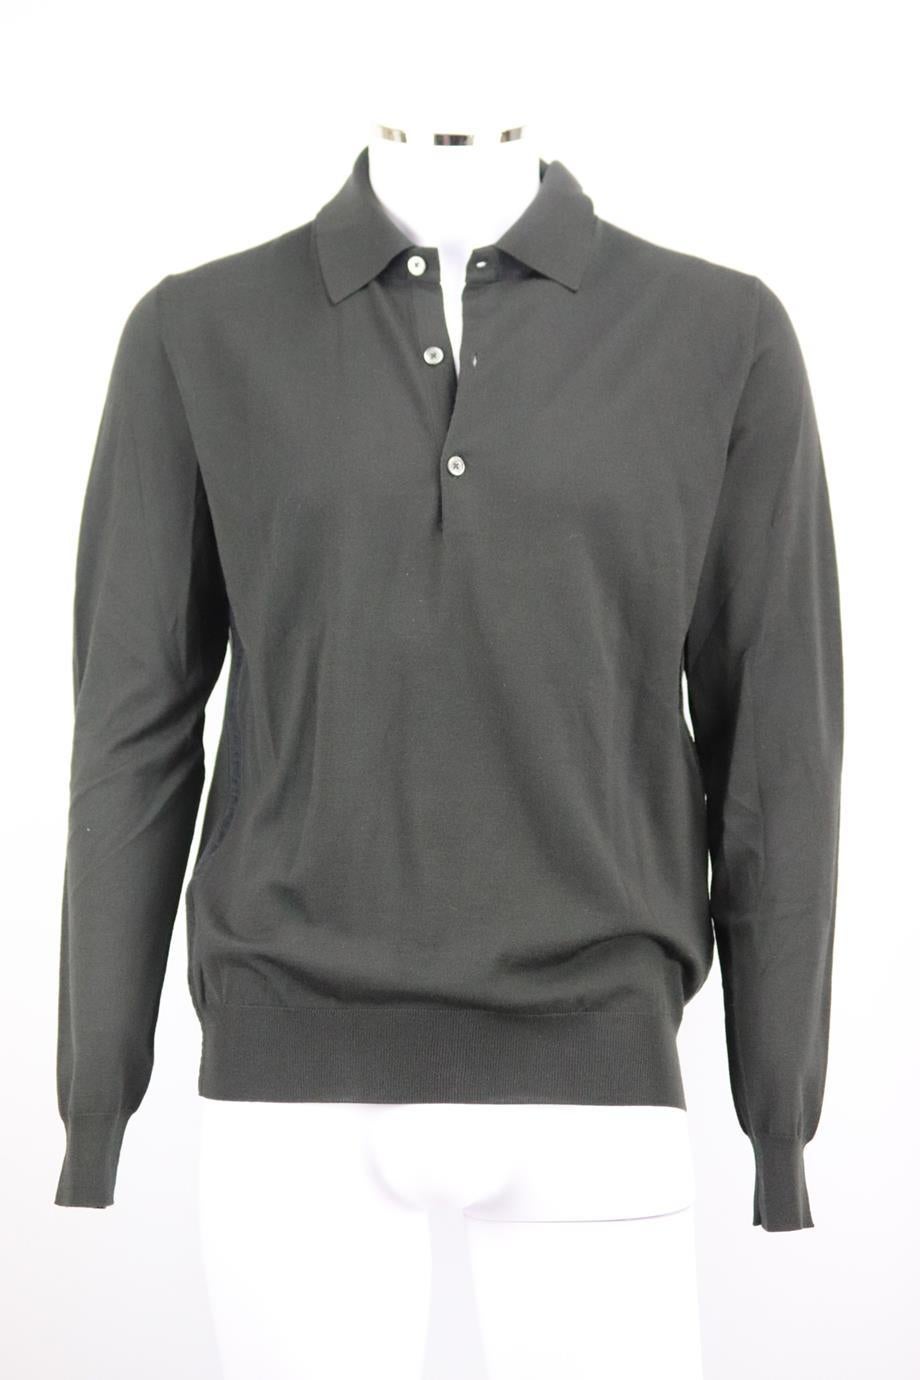 Hermès men's wool polo shirt. Black. Long sleeve, v-neck. Slips on. 100% Wool; fabric2: 100% cotton. Size: Large (IT 50, UK/US Chest 40, UK/US Collar 16). Shoulder to shoulder: 18 in. Chest: 42 in. Waist: 40 in. Hips: 36 in. Length: 27 in. Sleeve